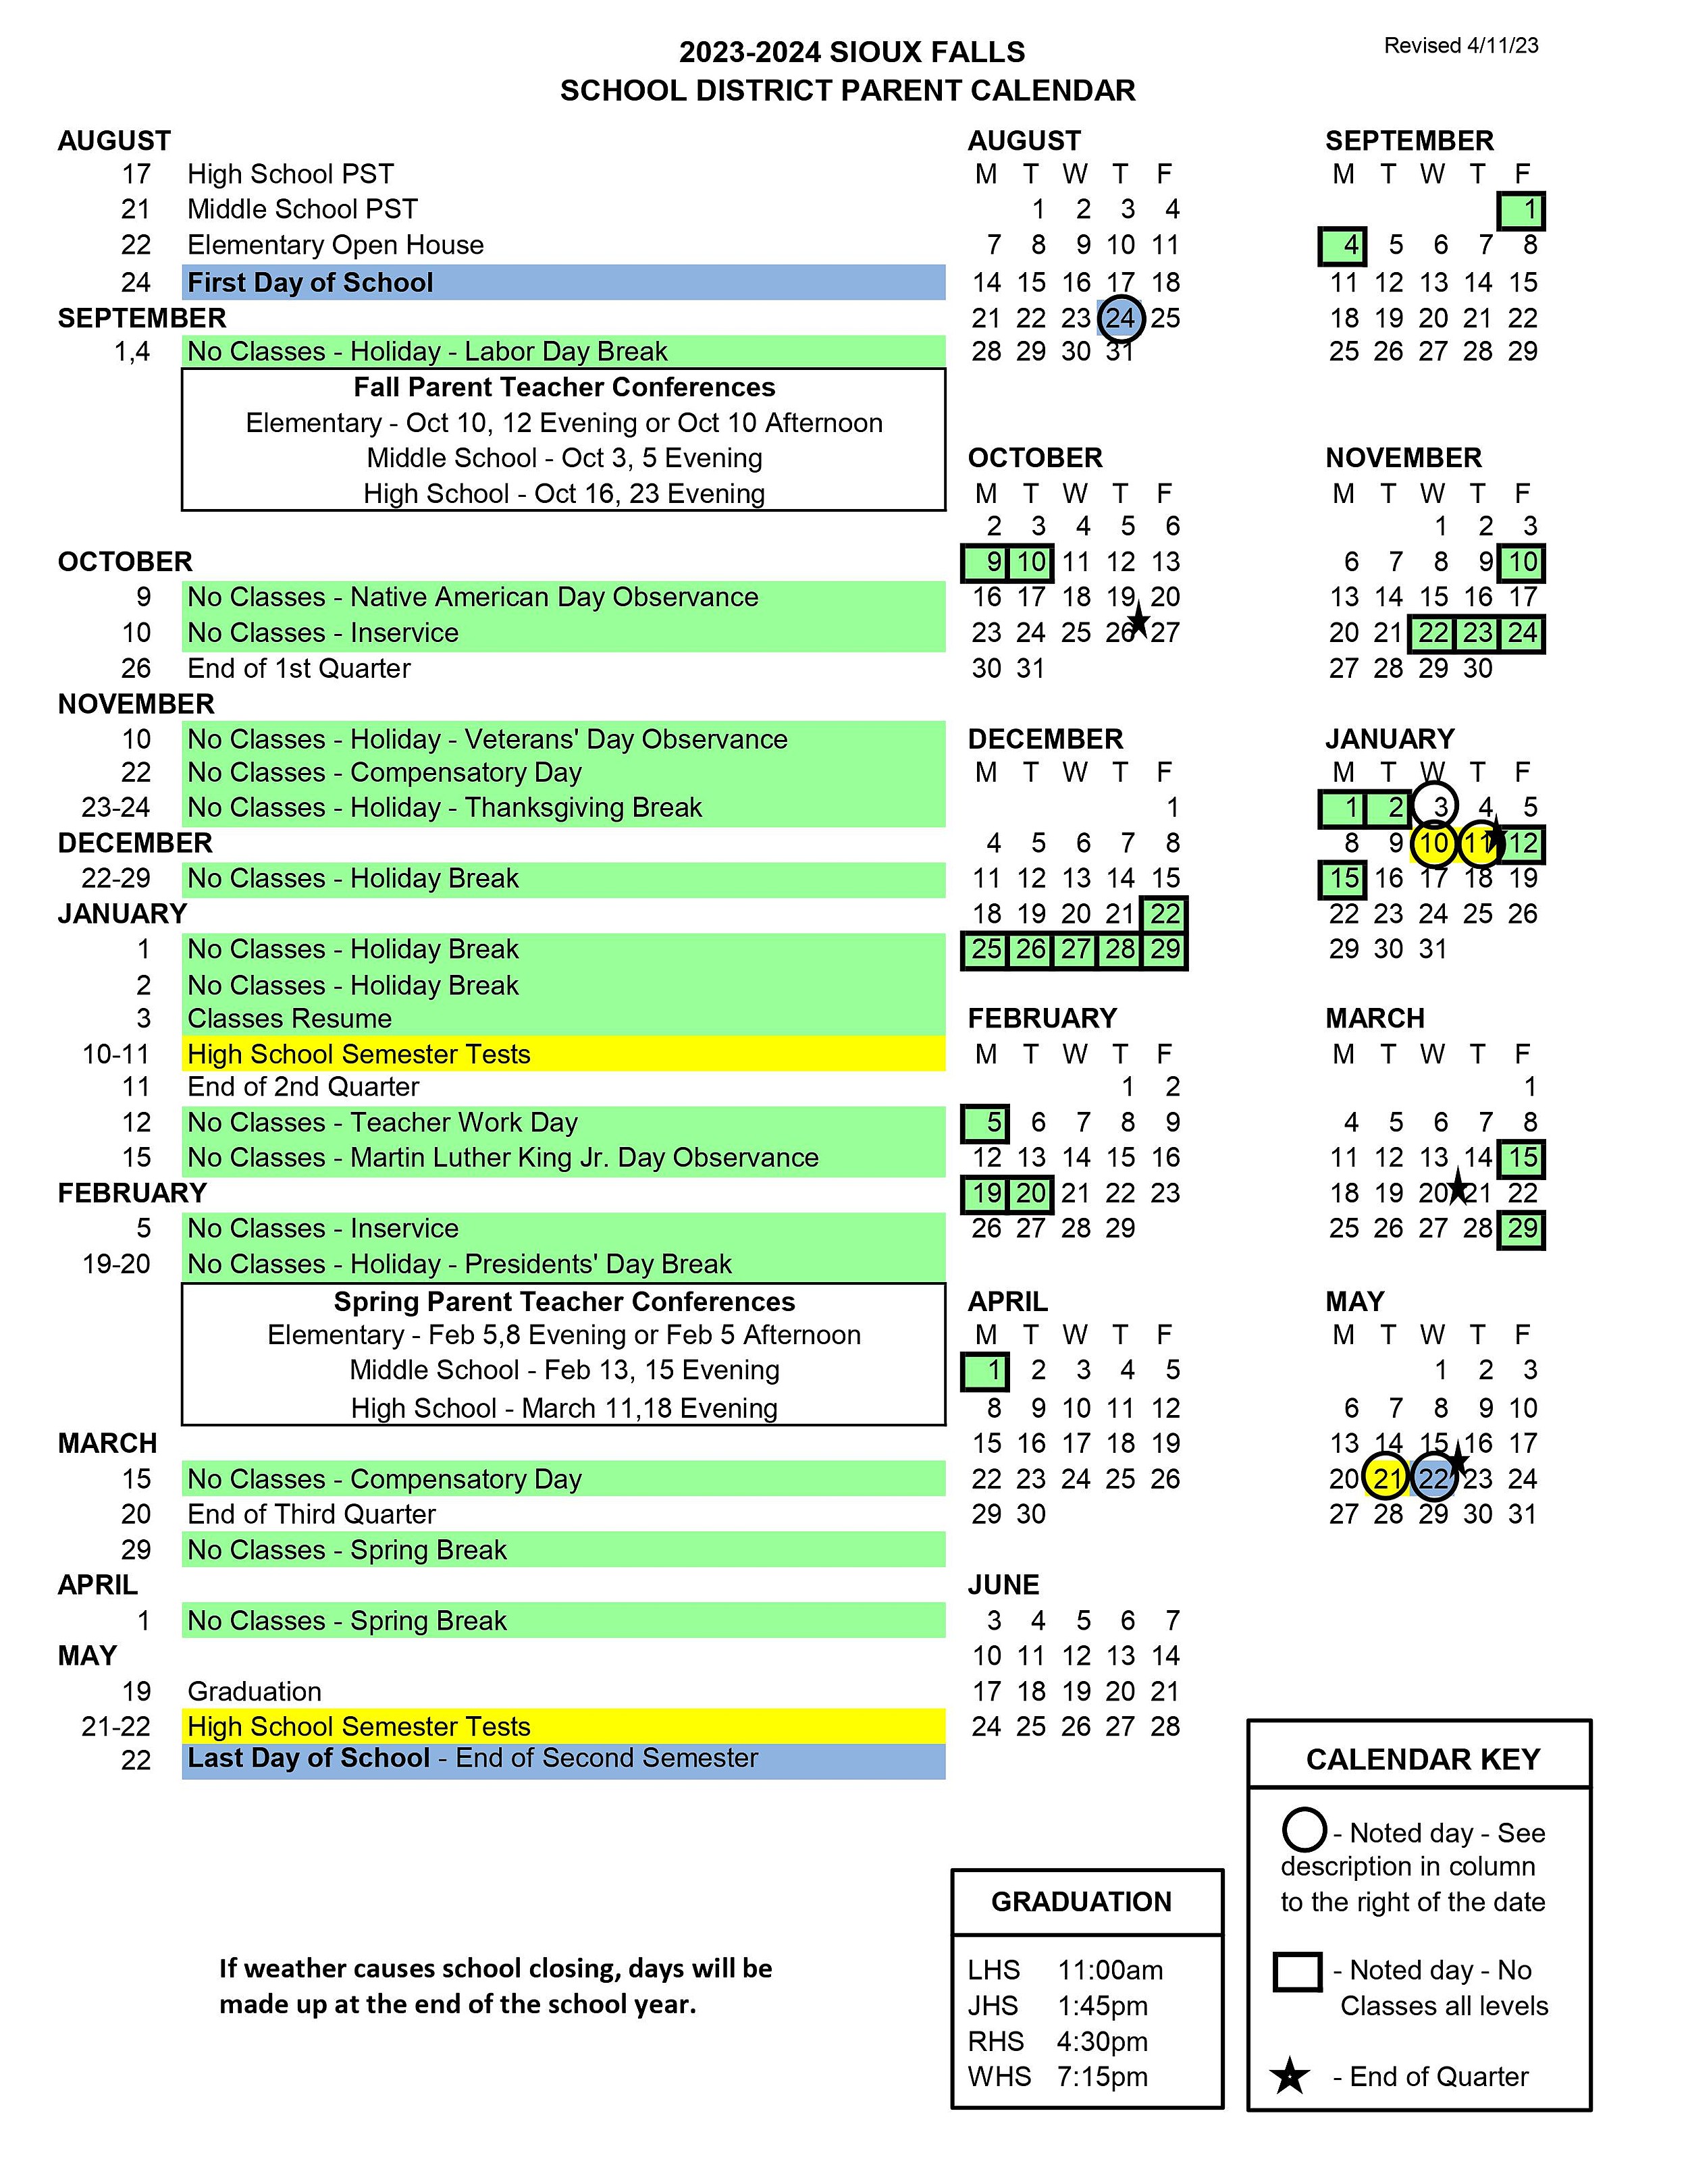 here-is-the-sioux-falls-school-district-calendar-2023-2024